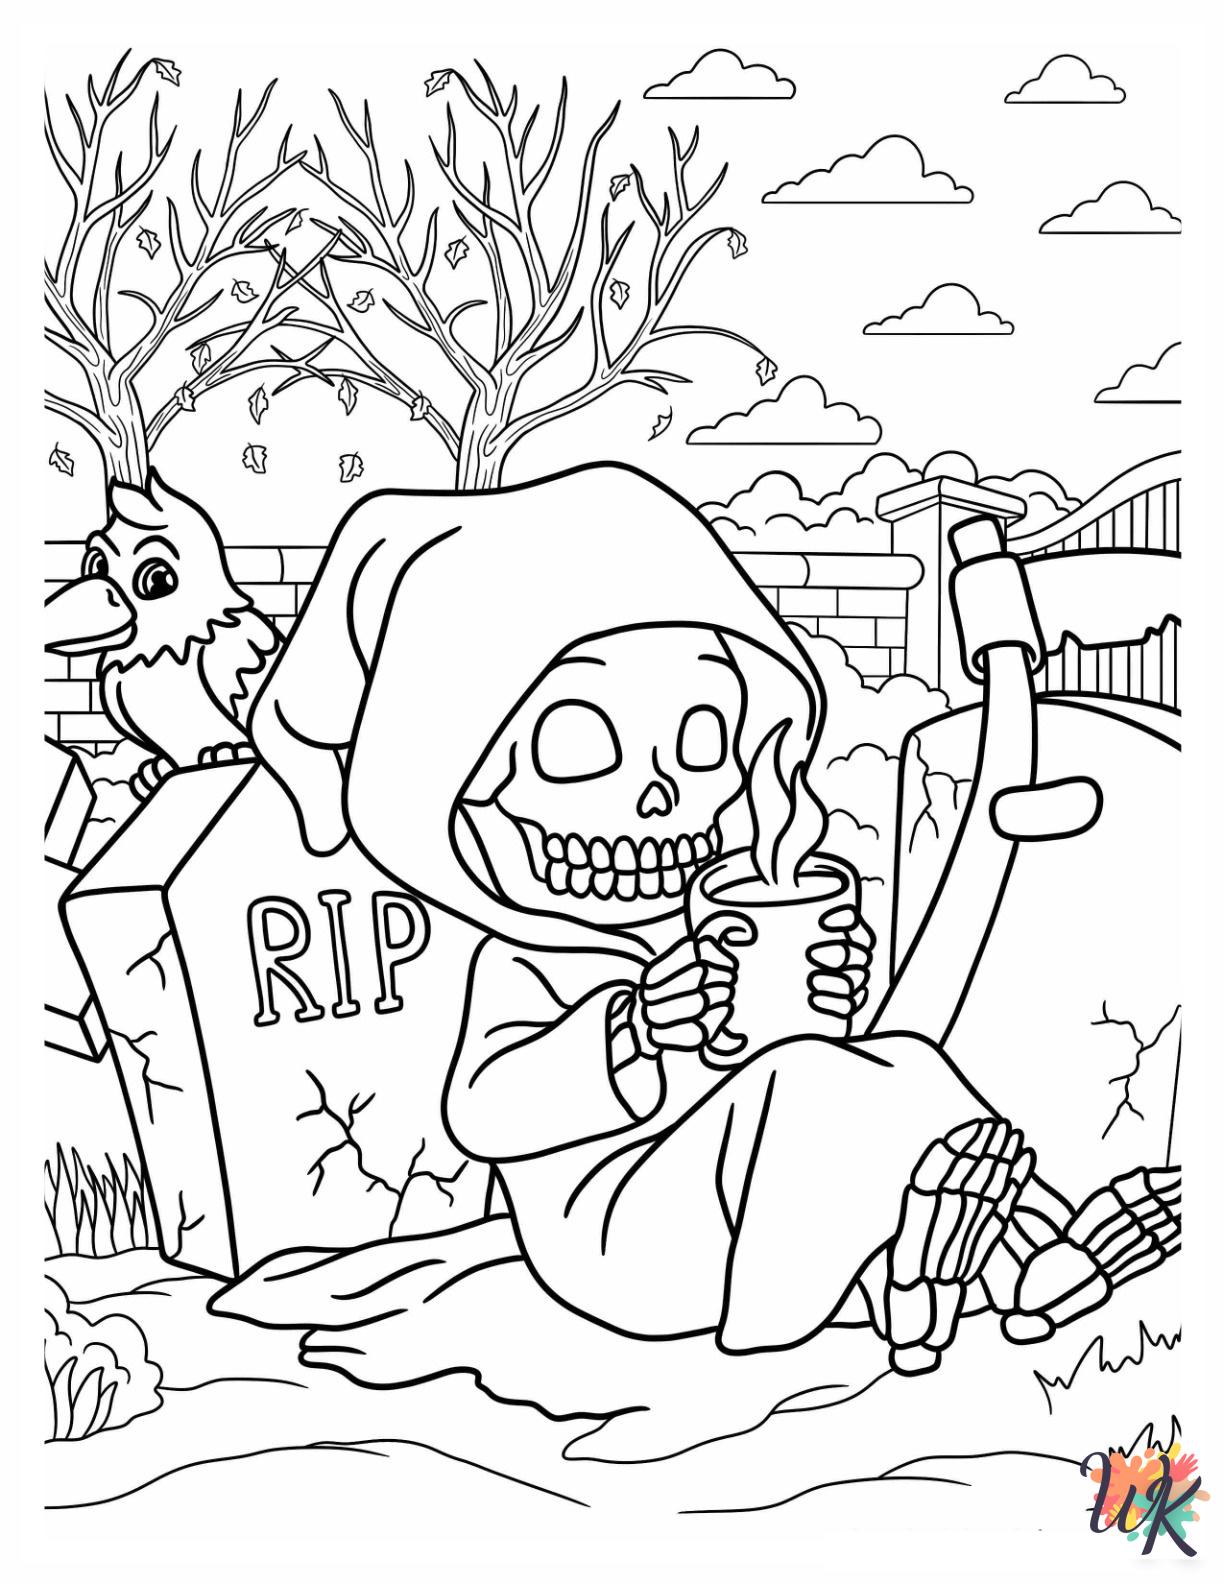 Skeleton cards coloring pages